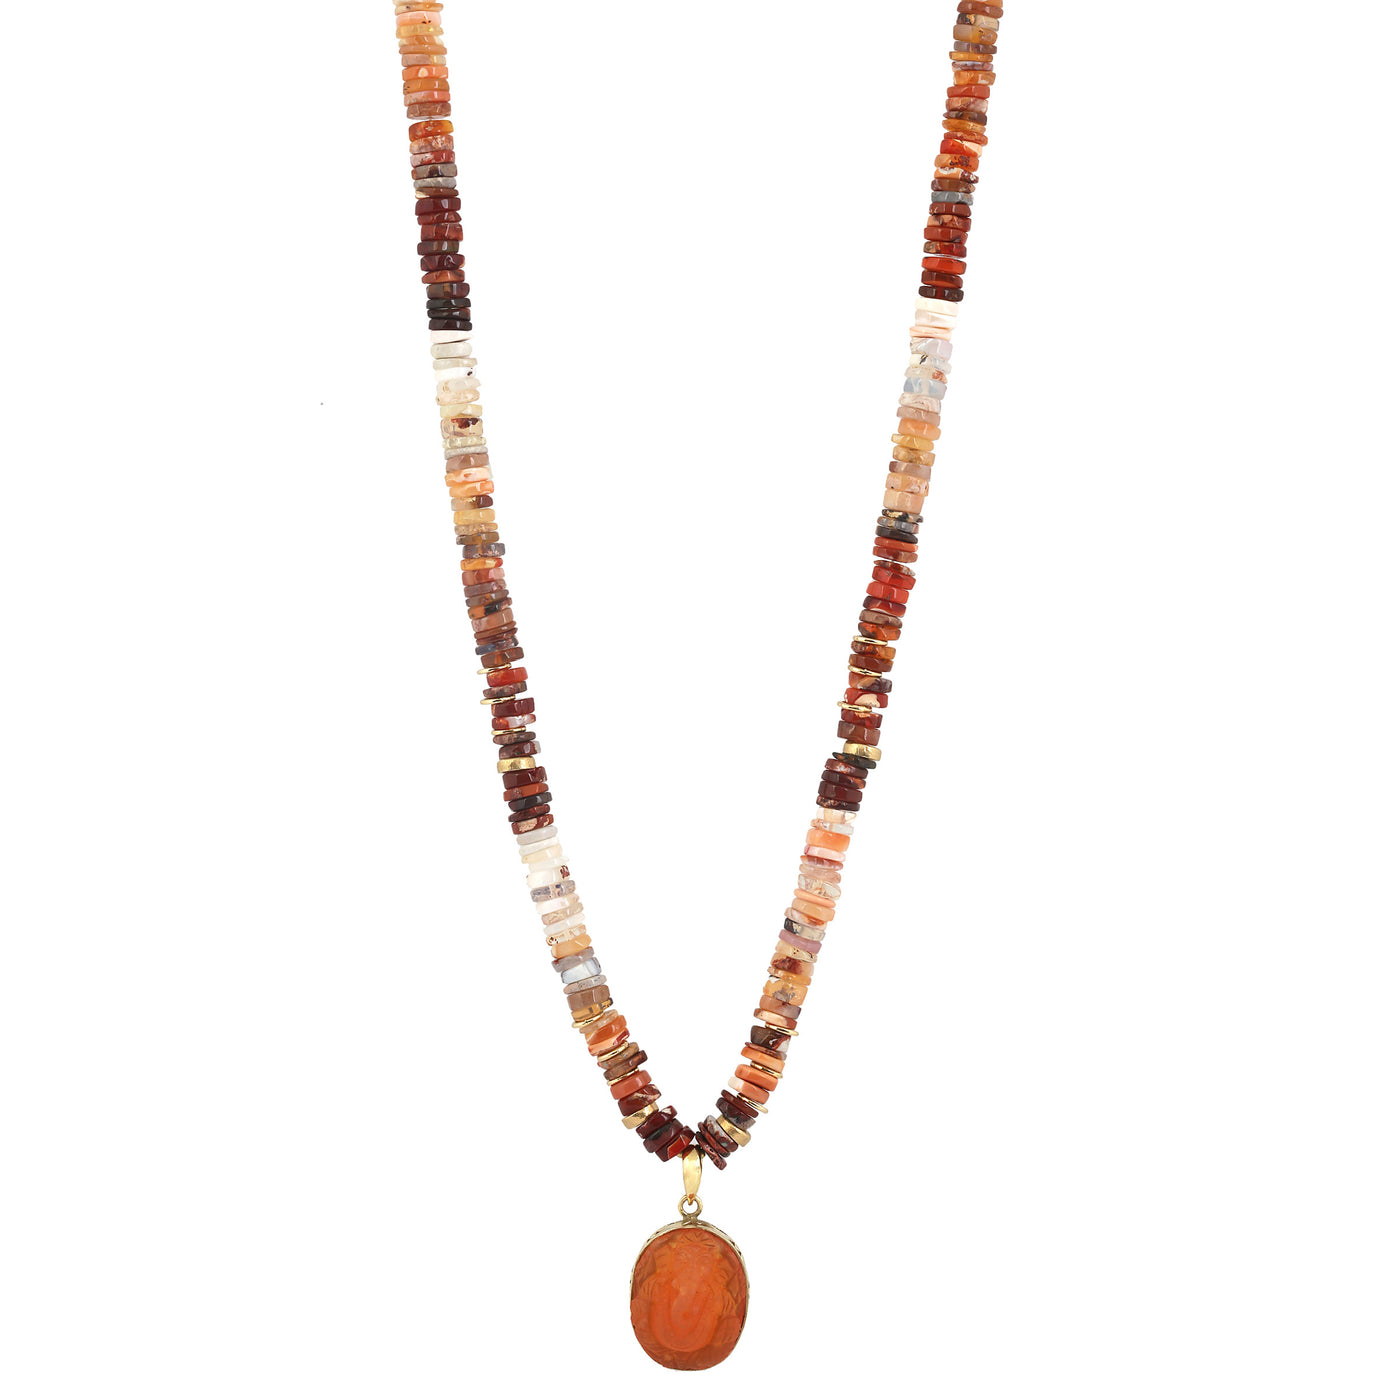 Lambo necklace with fire opal and ganesh in carnelian